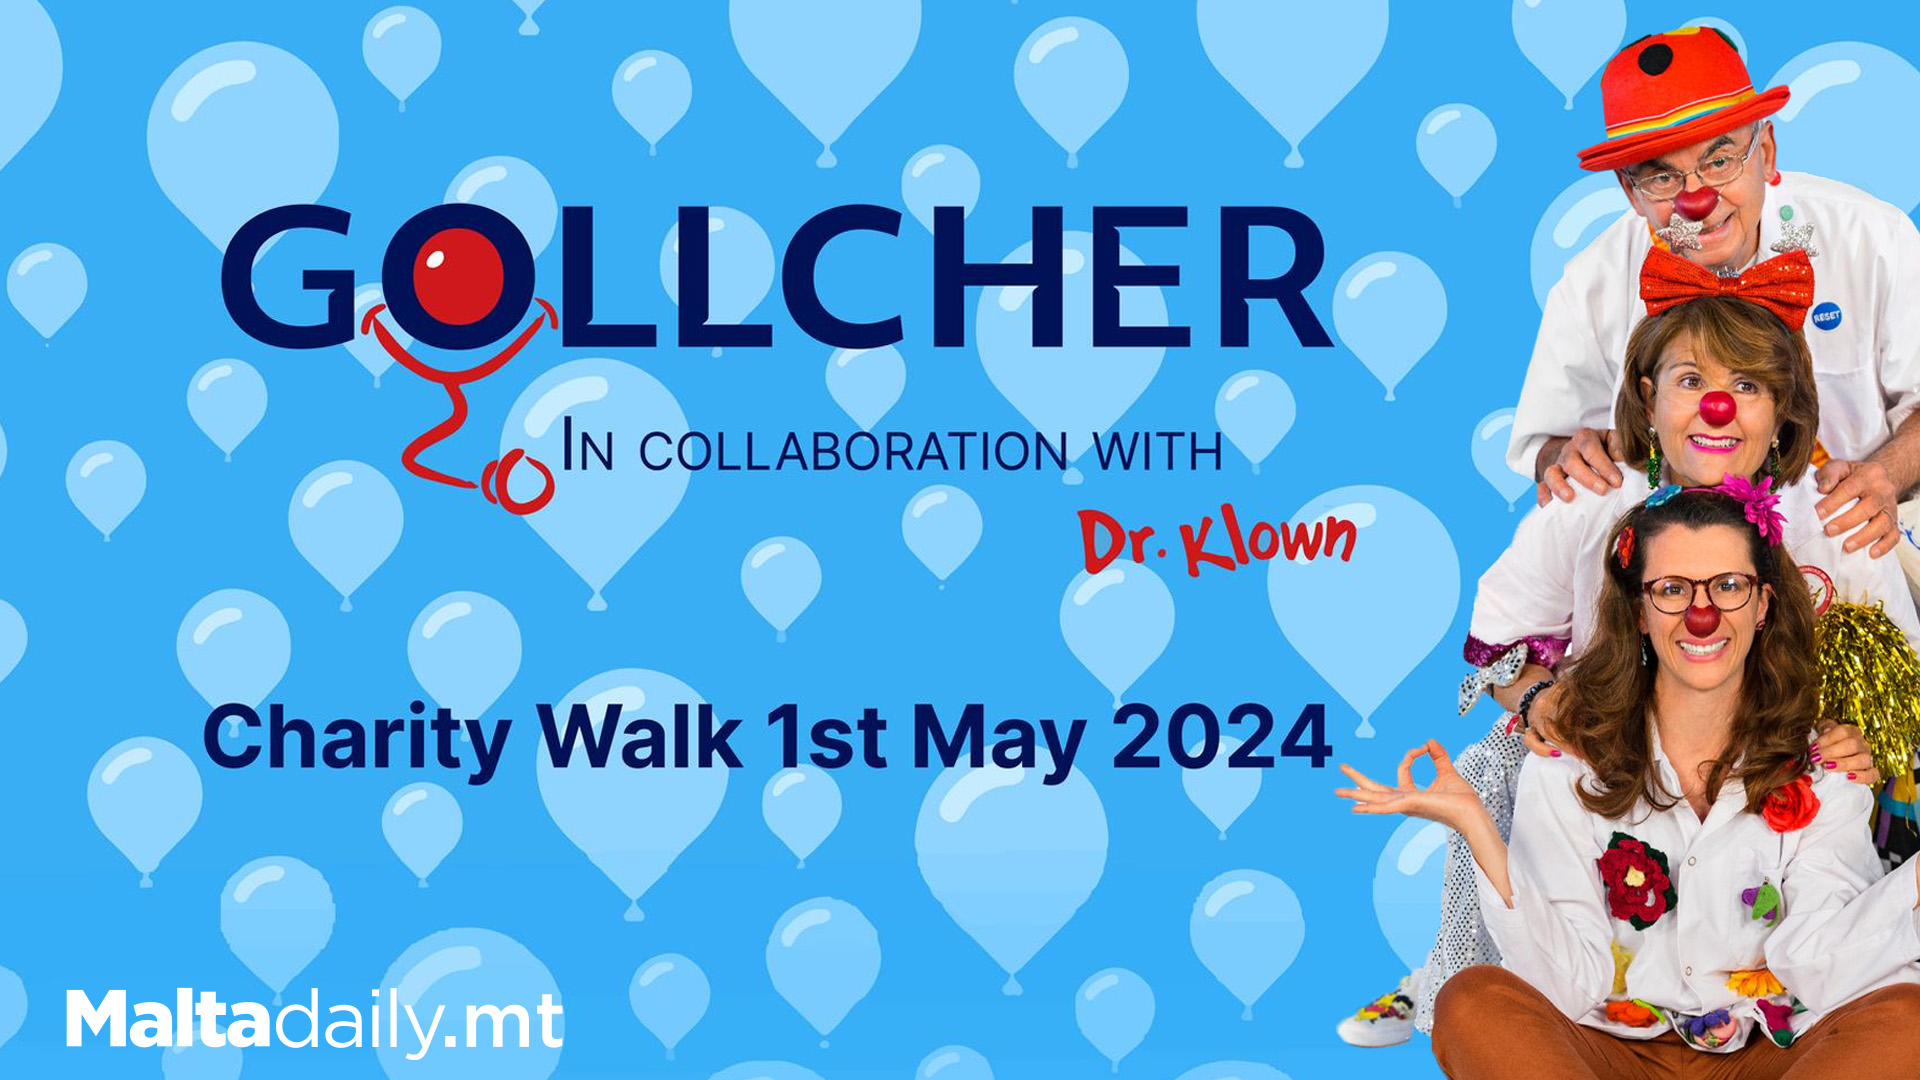 The Gollcher Charity Walk 2024: In Aid Of Dr Klown